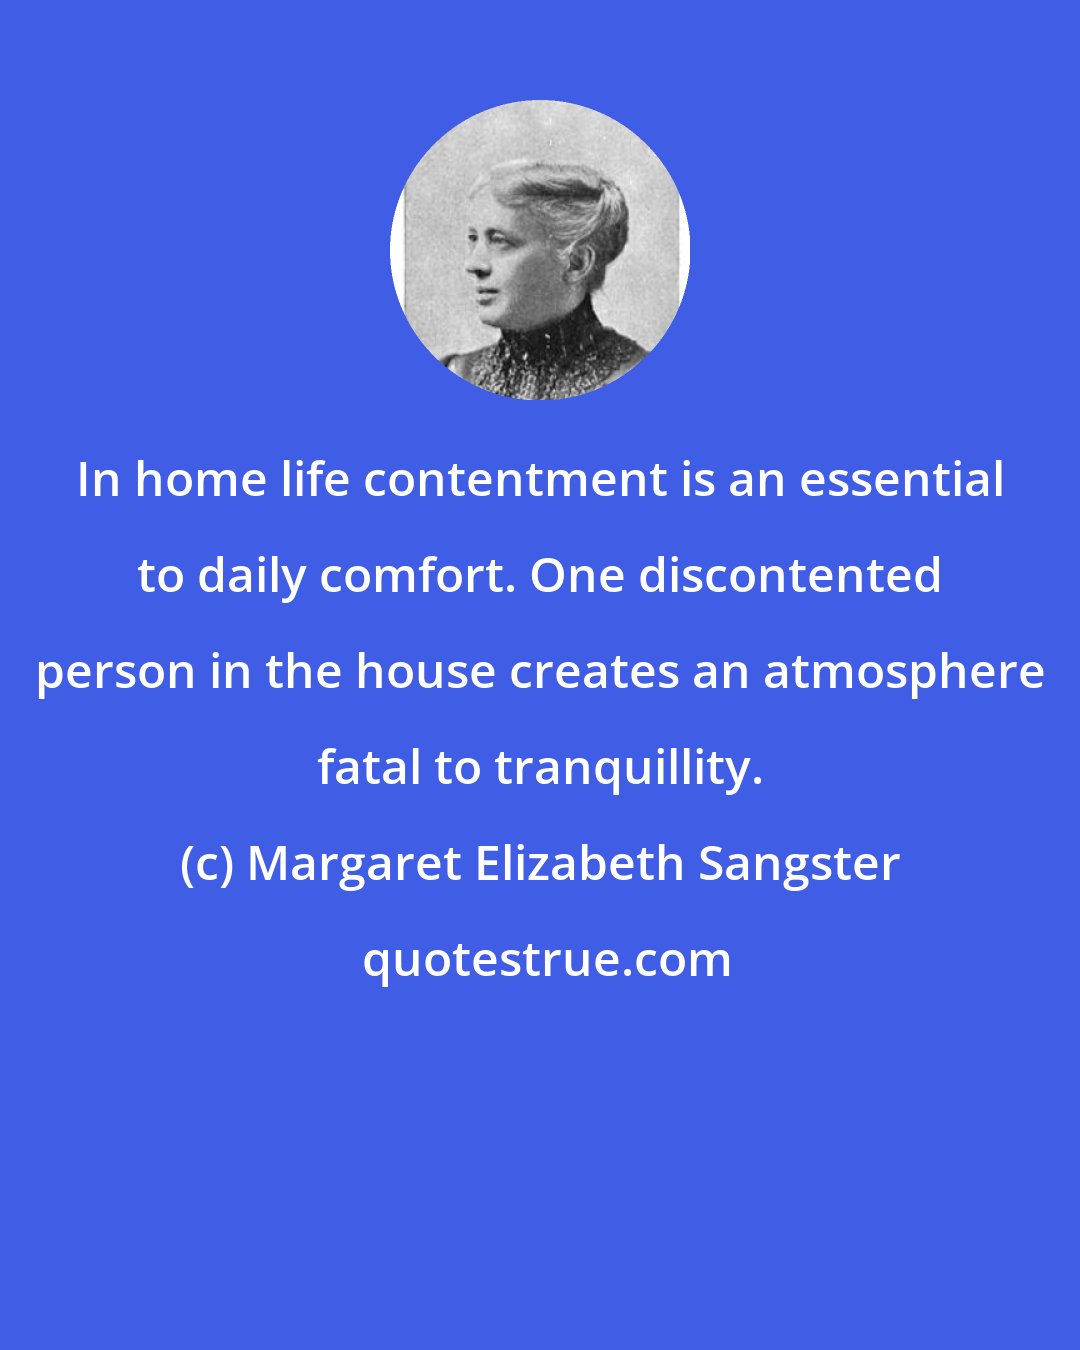 Margaret Elizabeth Sangster: In home life contentment is an essential to daily comfort. One discontented person in the house creates an atmosphere fatal to tranquillity.